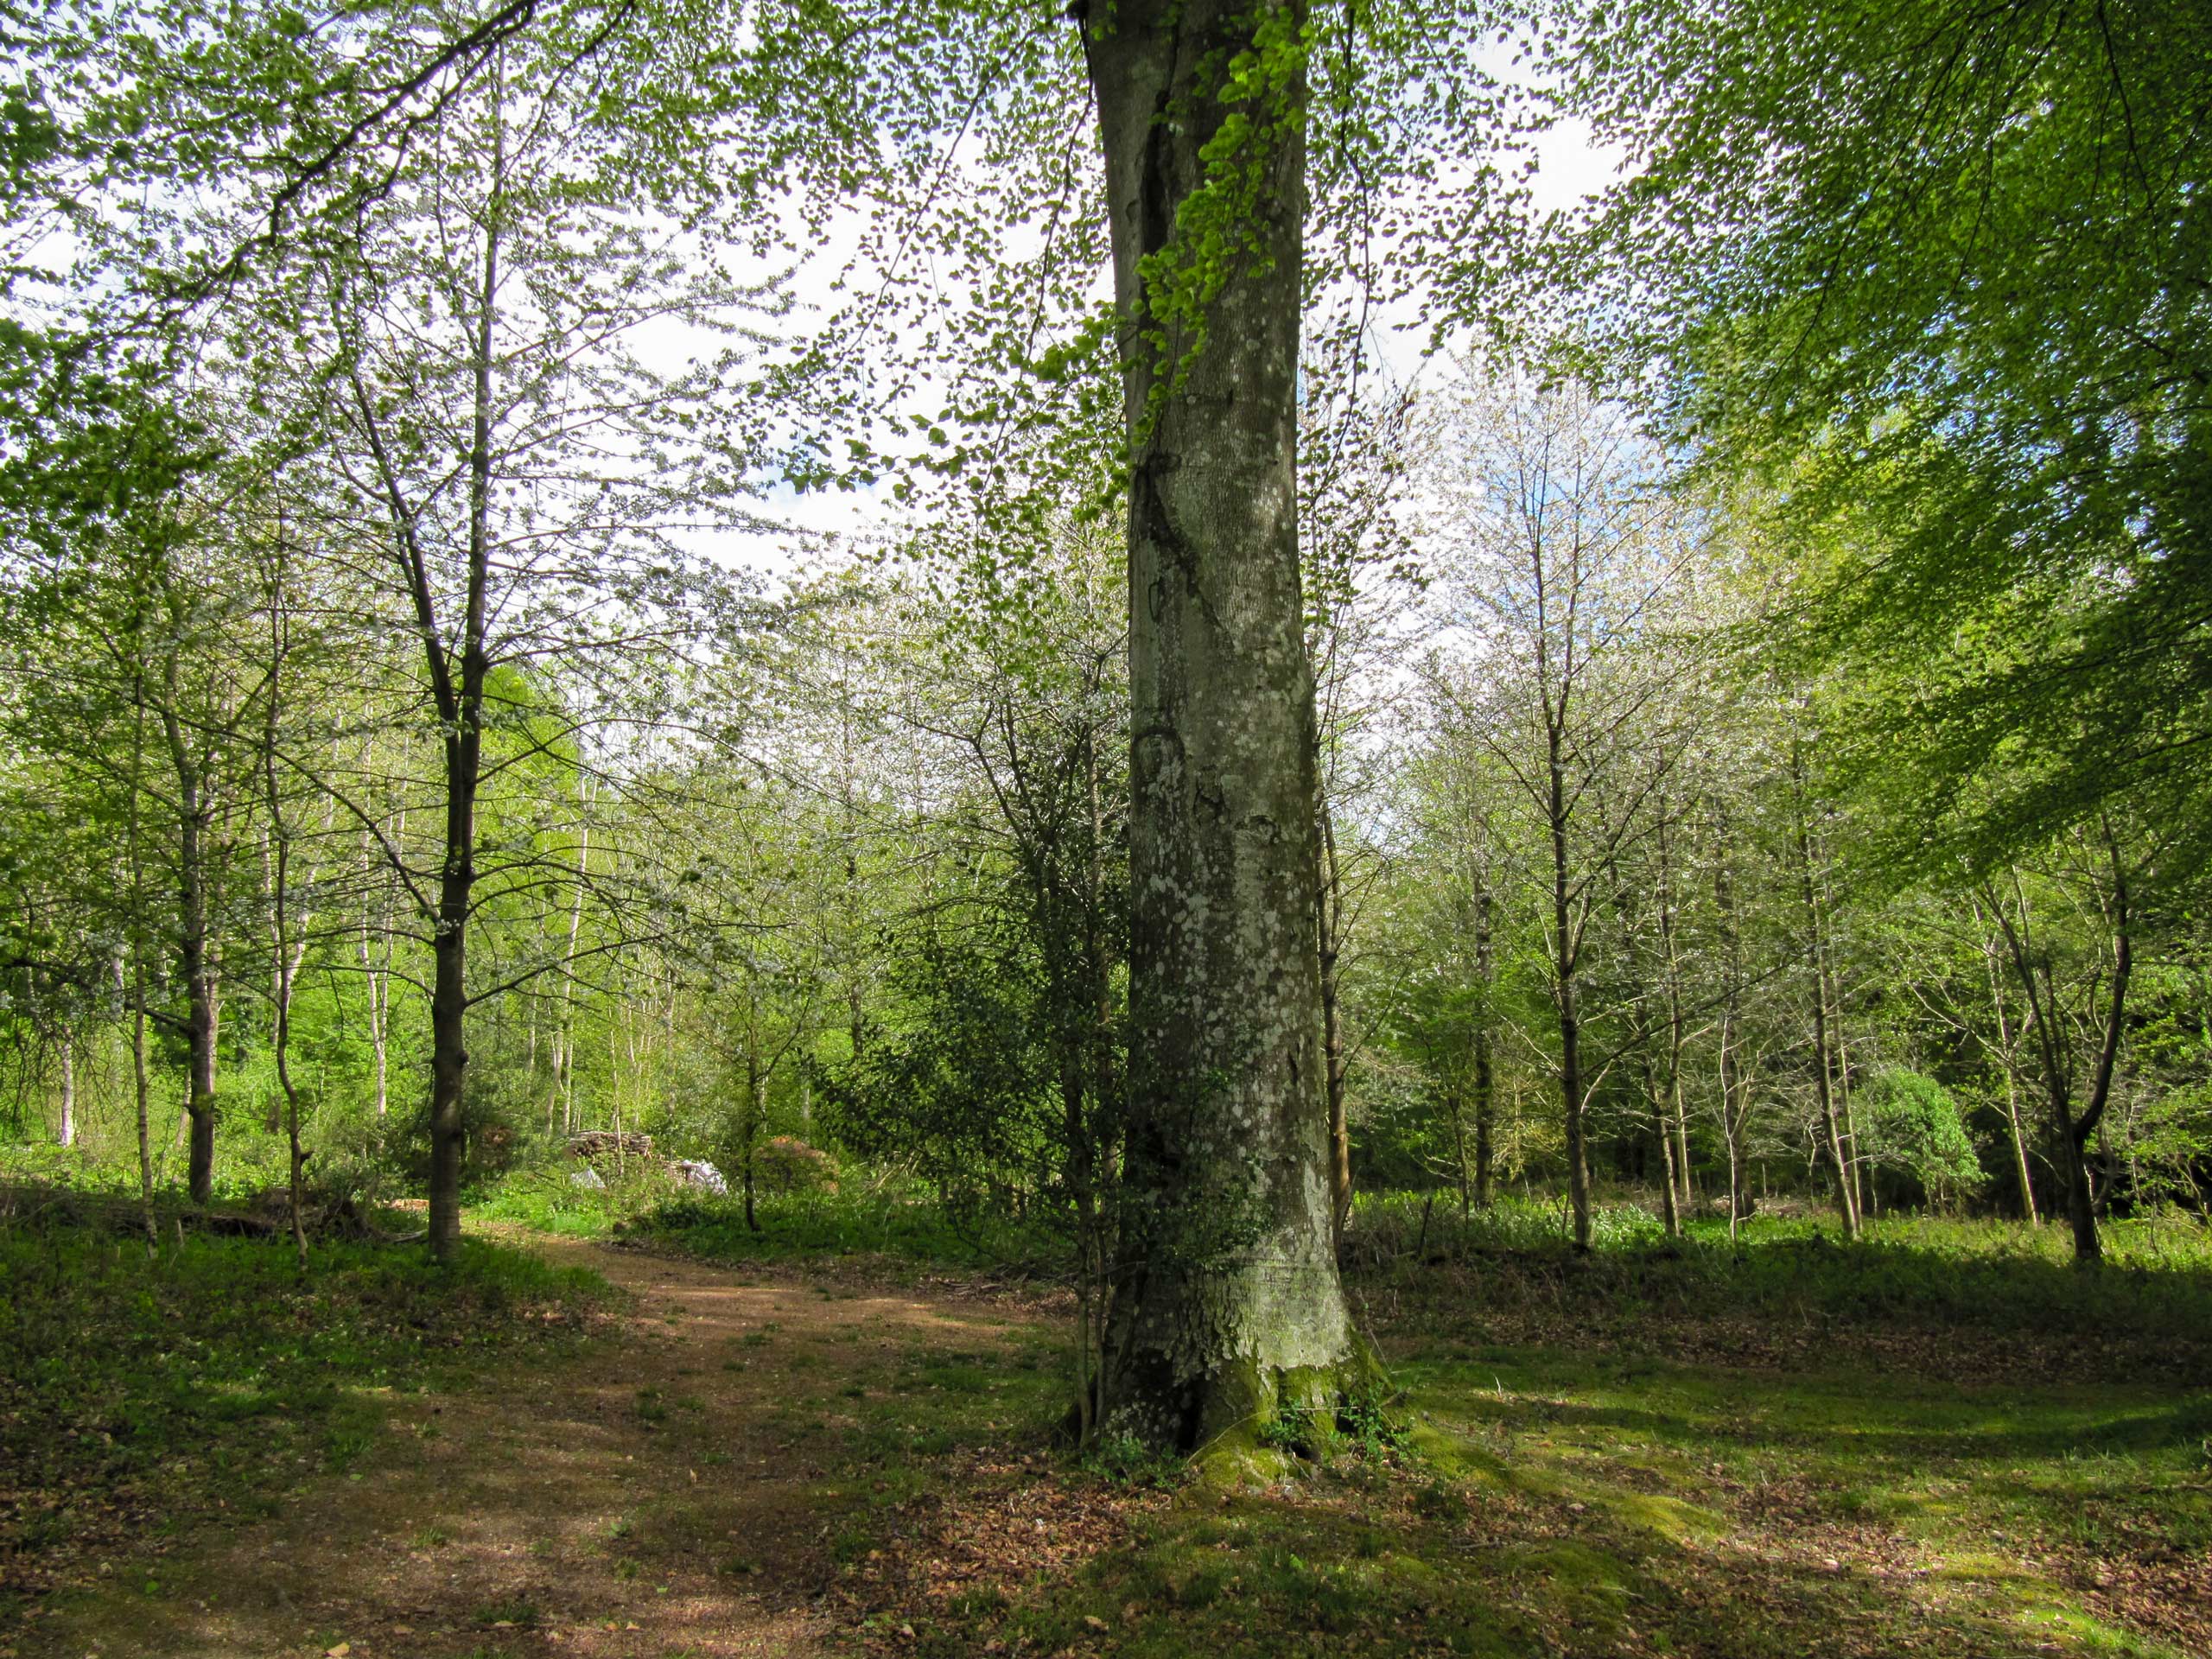 Slindon Woods in West Sussex